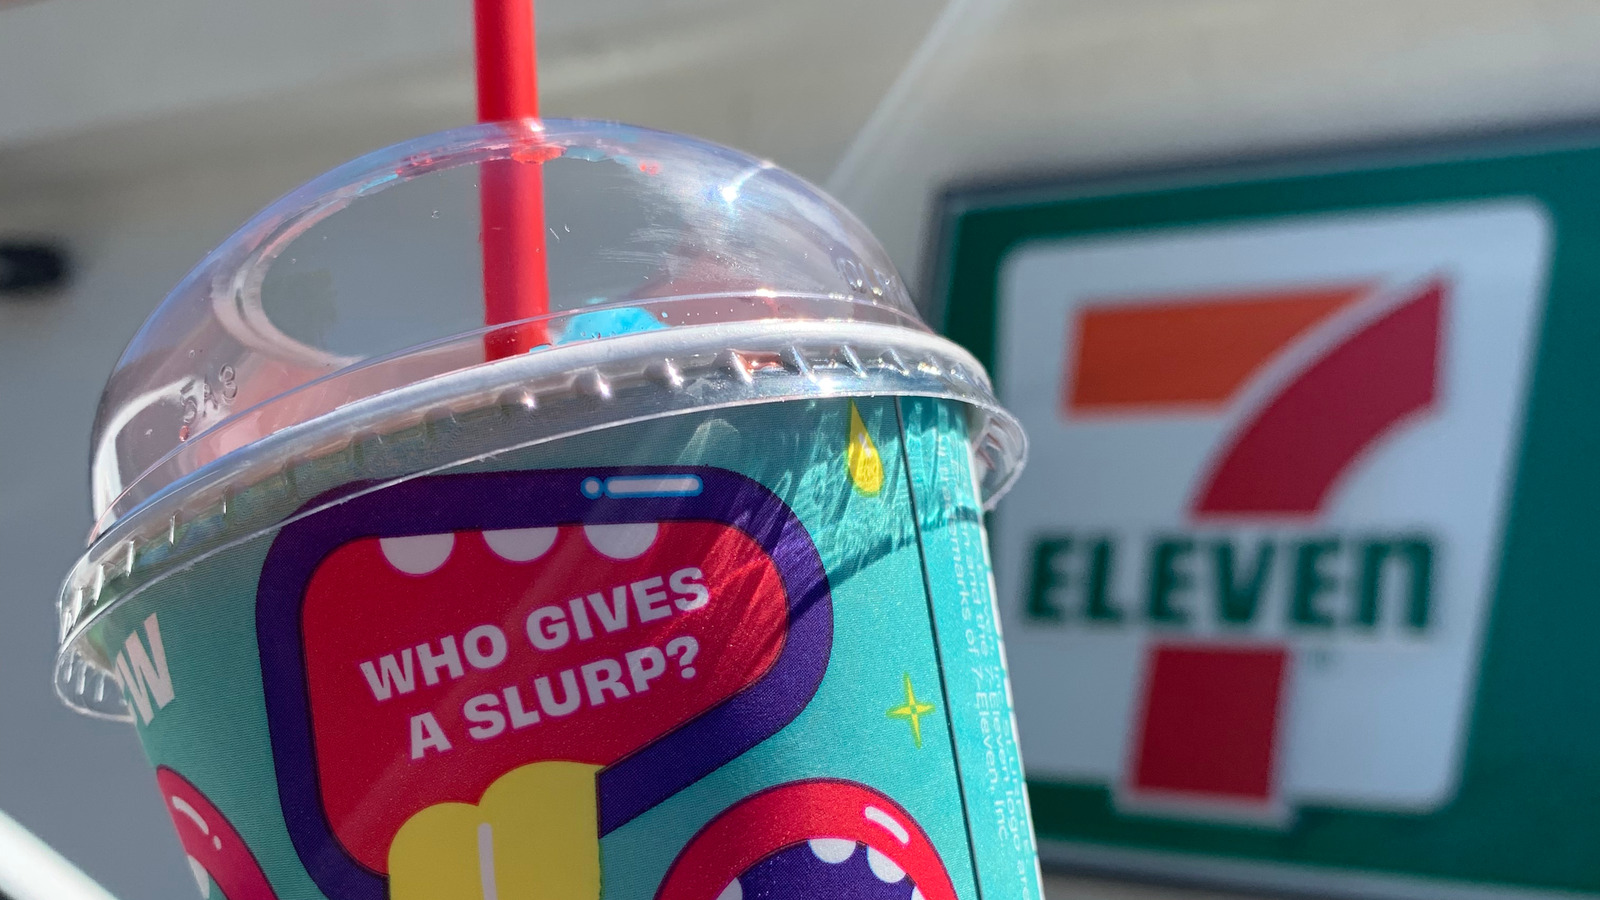 7Eleven's New Slurpee Flavors Will Help Keep You In The Summer Spirit